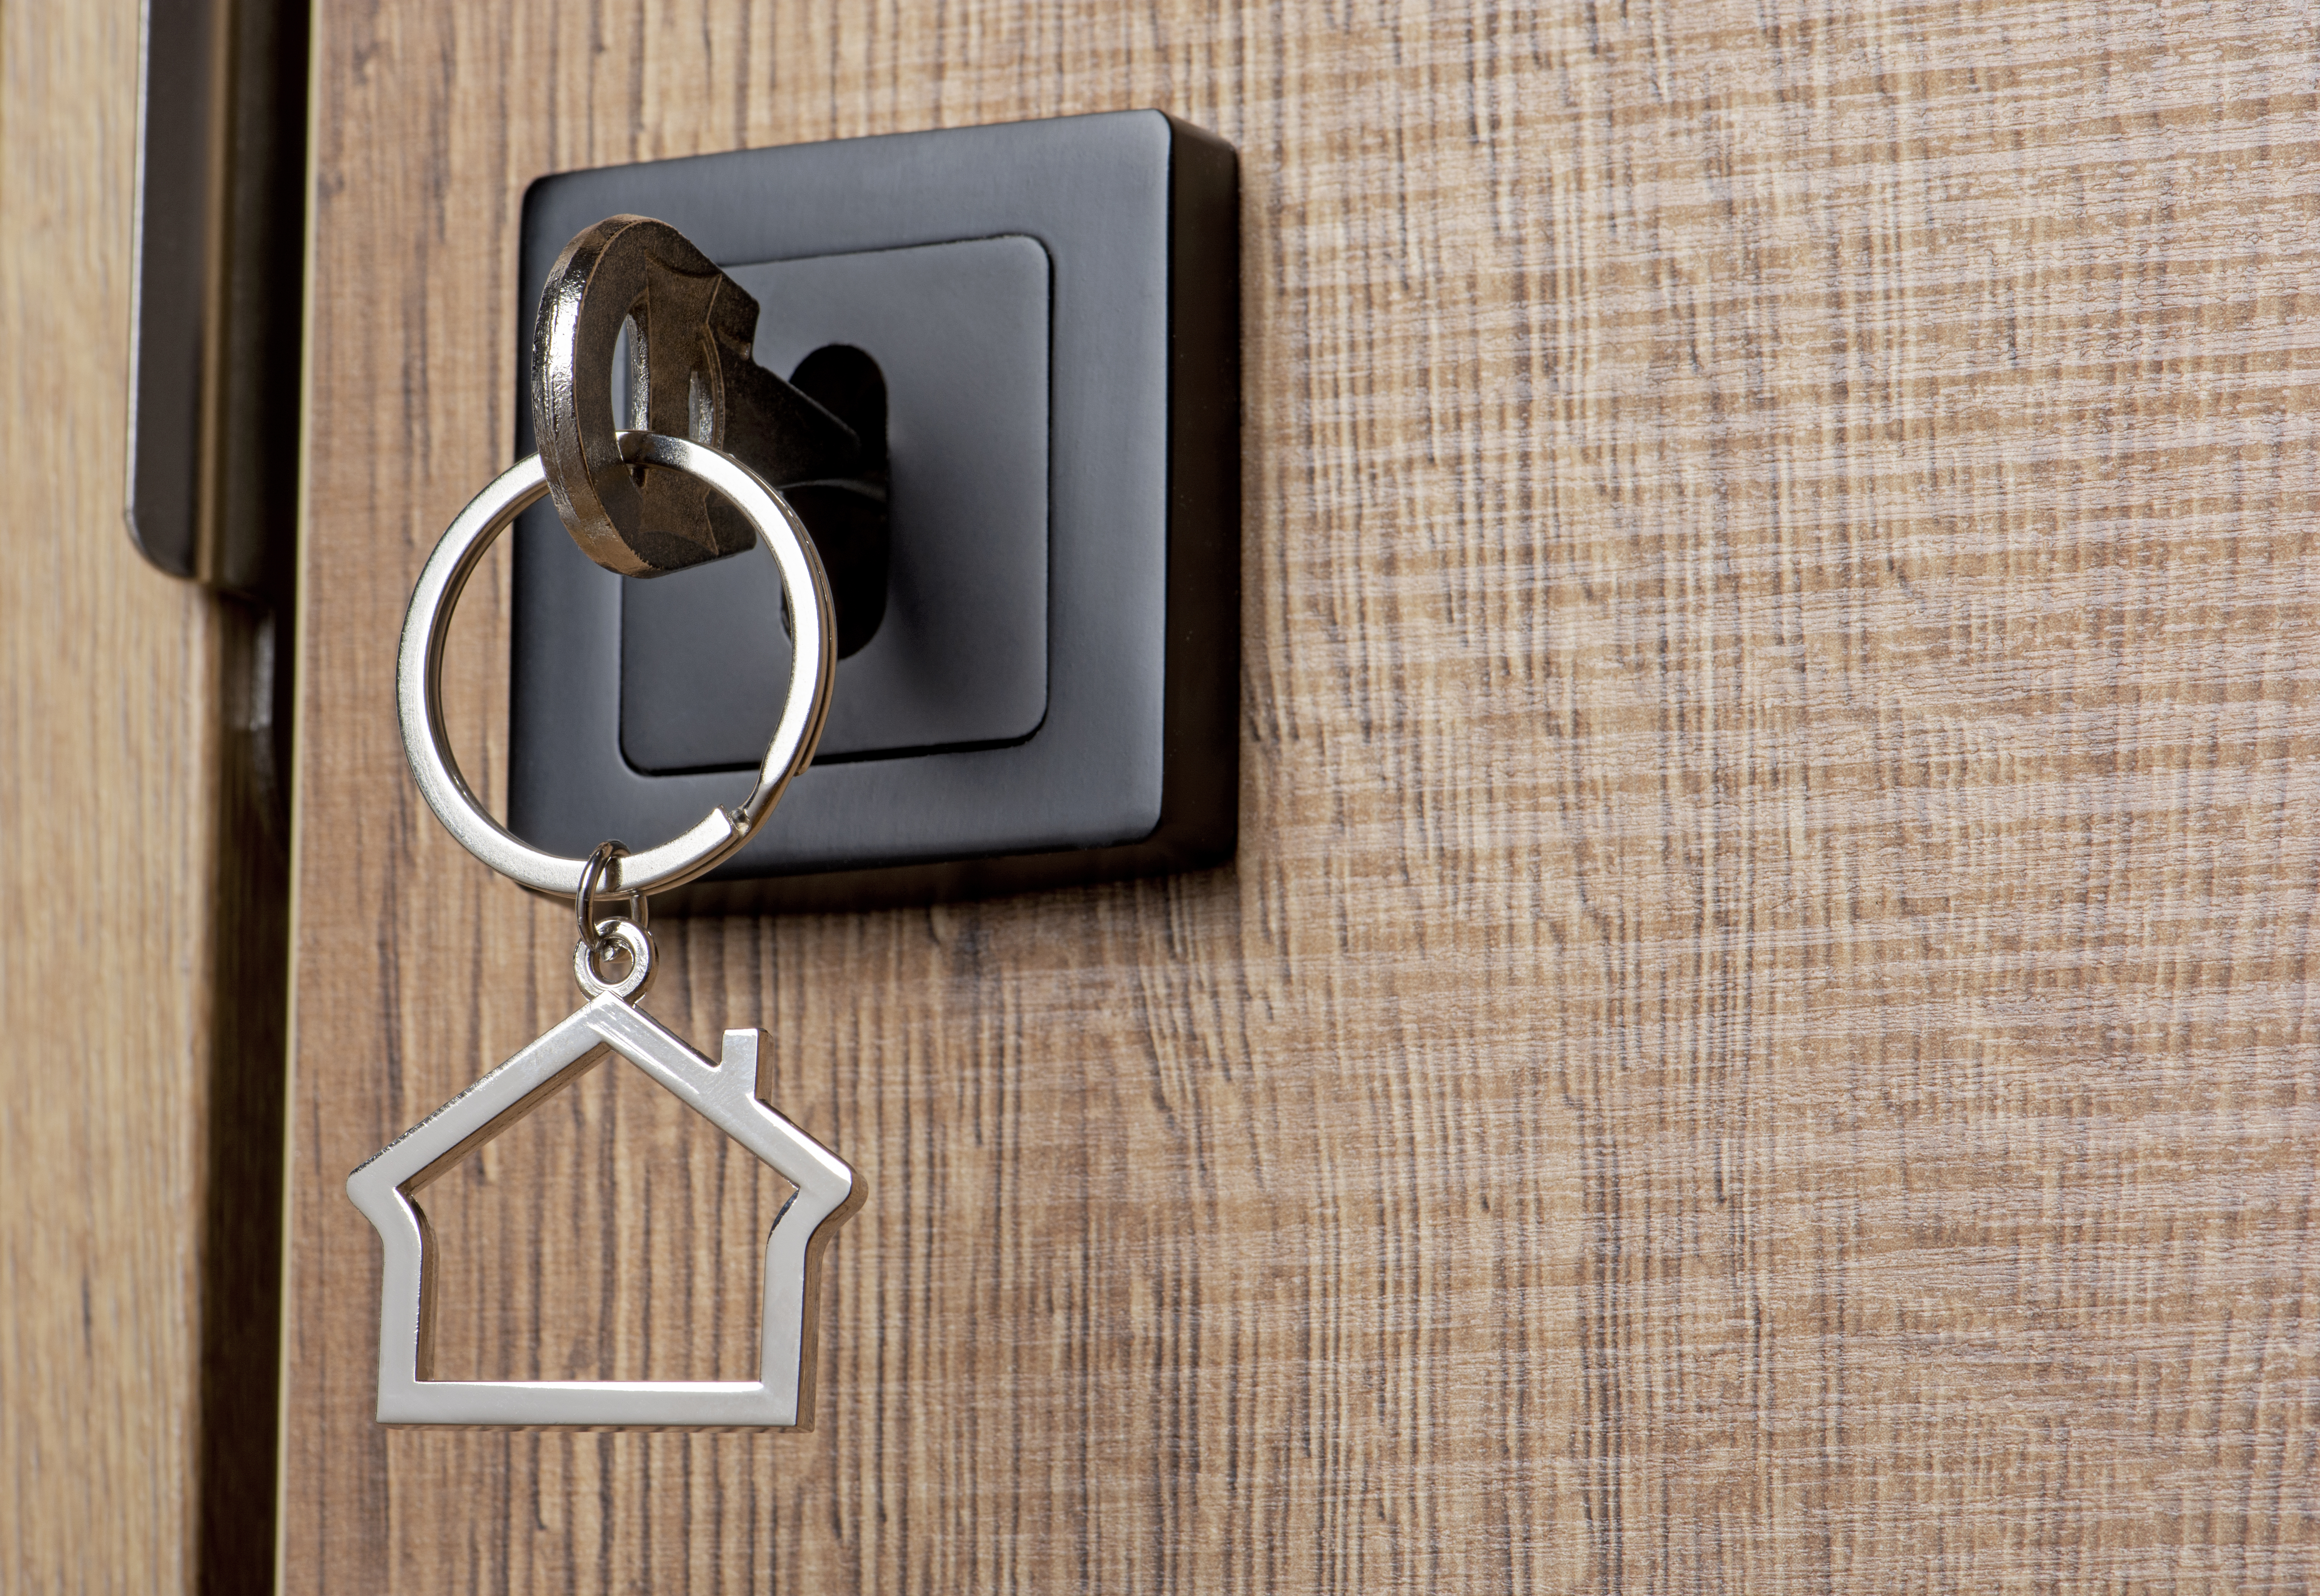 The benefits of changing your locks when you move home